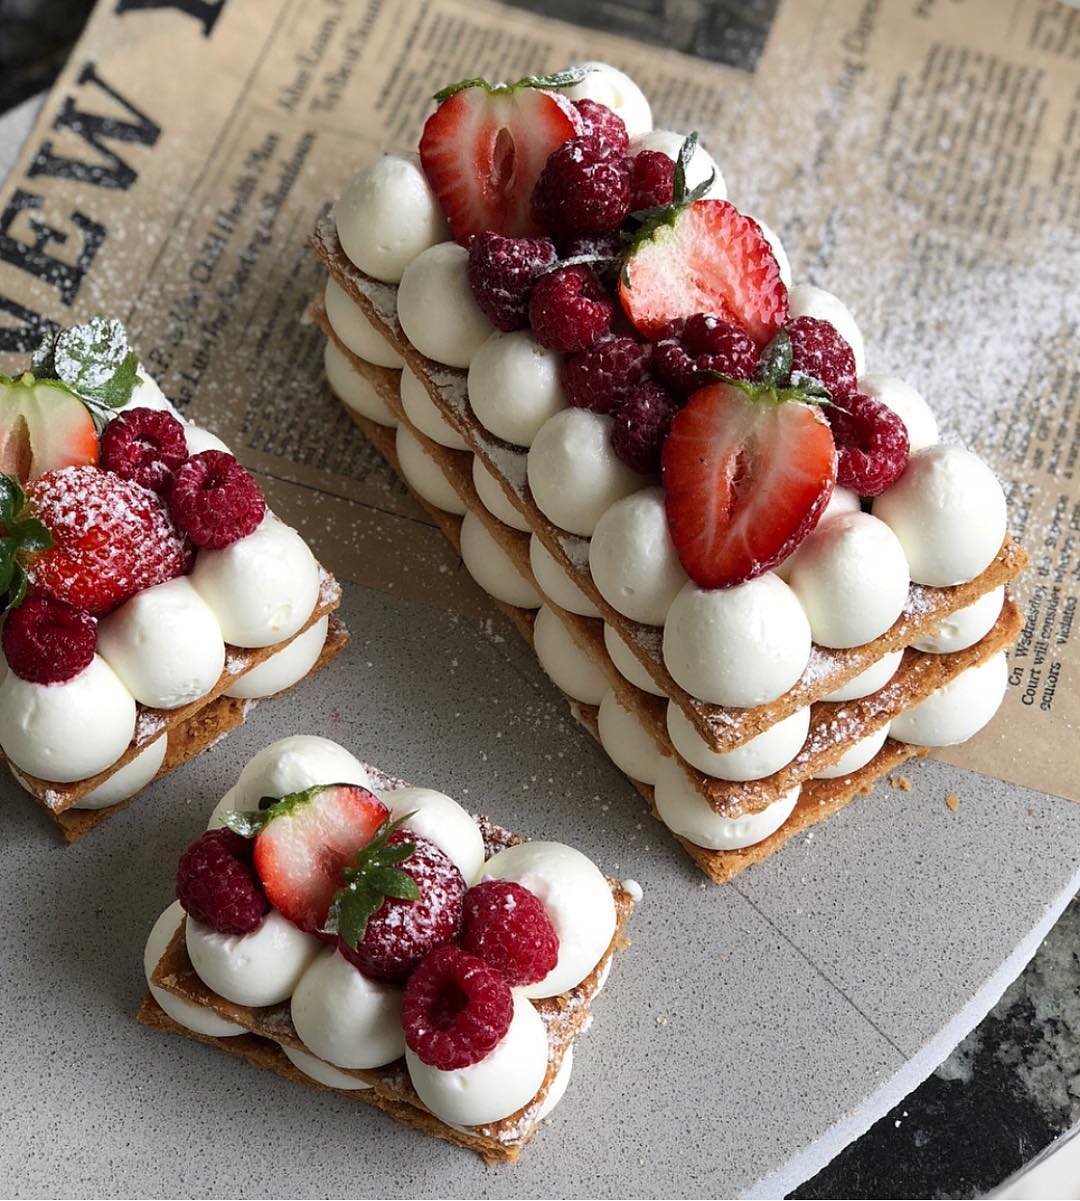 The Strawberry Mille Feuille Is As Delicious As It Looks ...